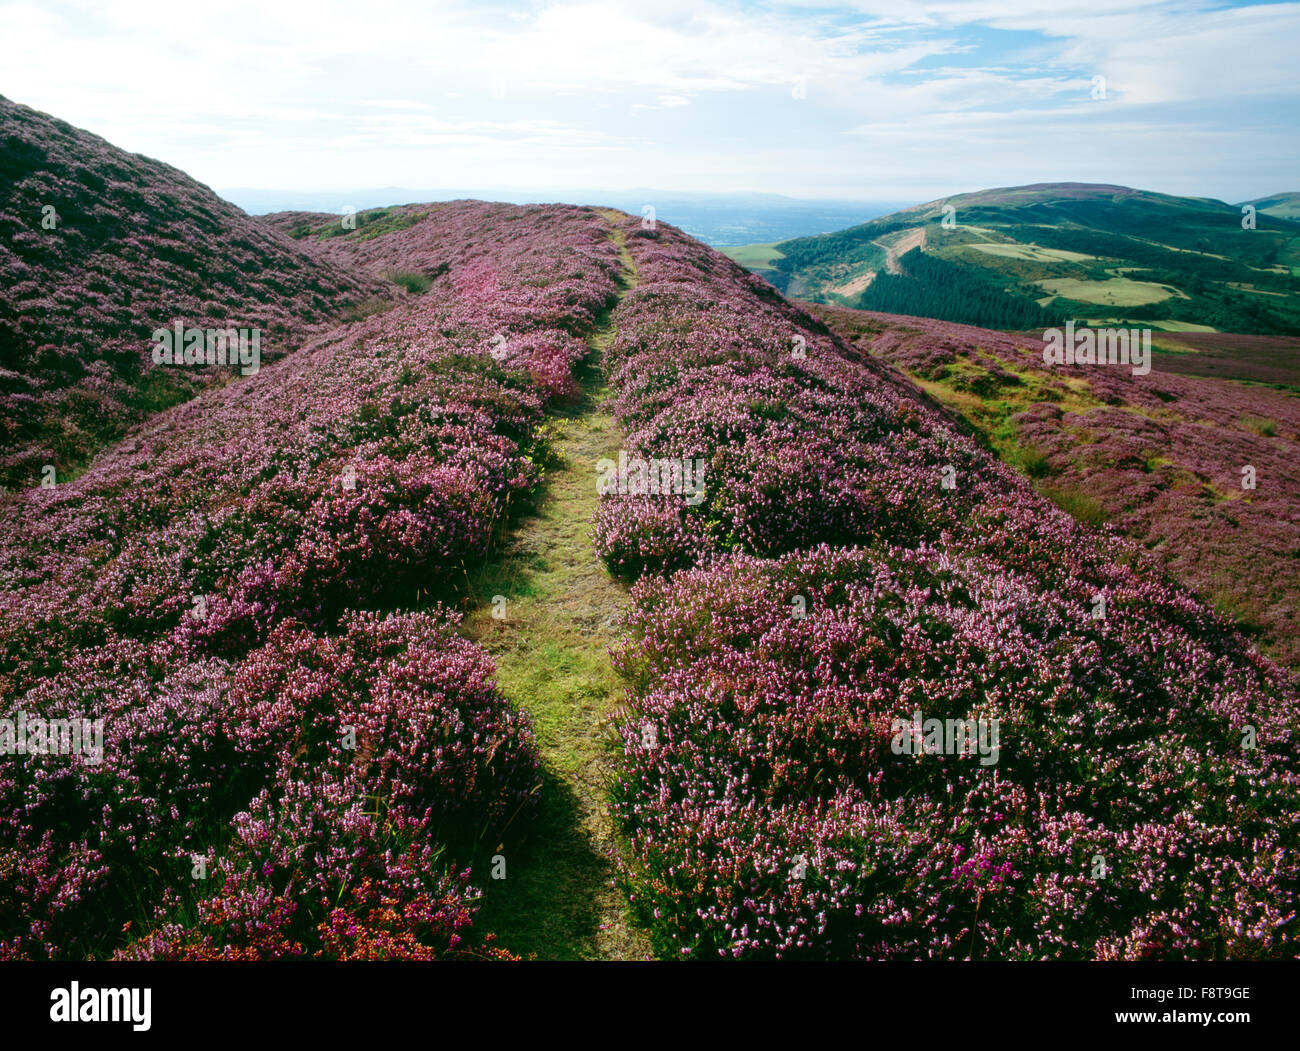 Heather covers the ramparts of Moel Arthur hillfort in the Clwydian Hills, another Iron Age fort defends Penycloddiau to rear R. Denbigh/Flint border. Stock Photo